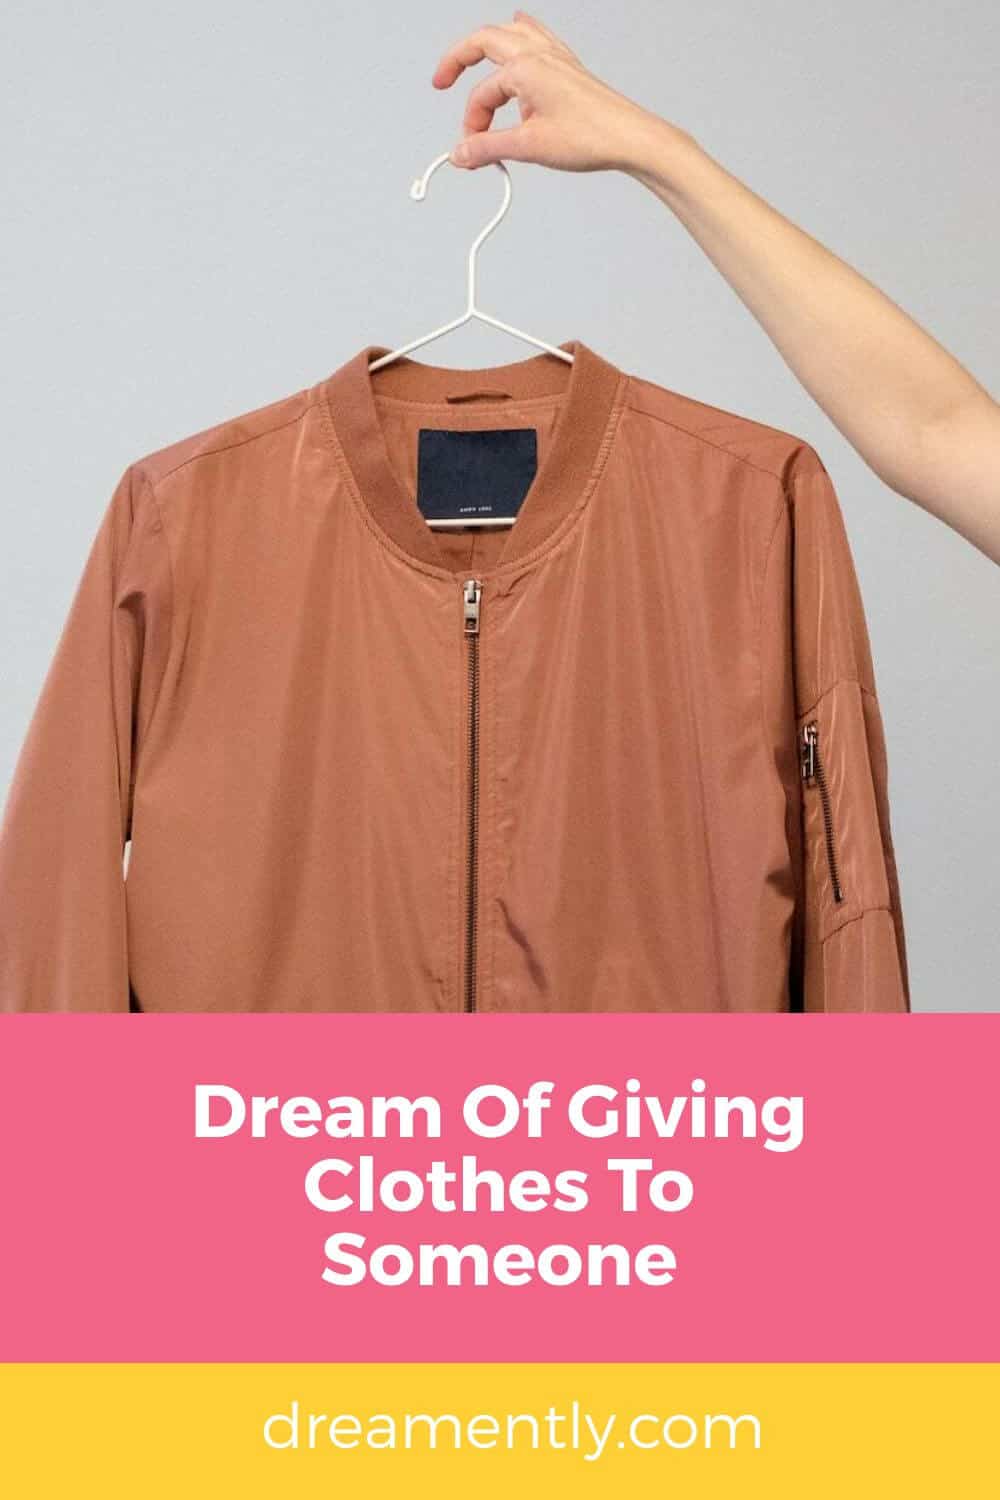 Dream Of Giving Clothes To Someone